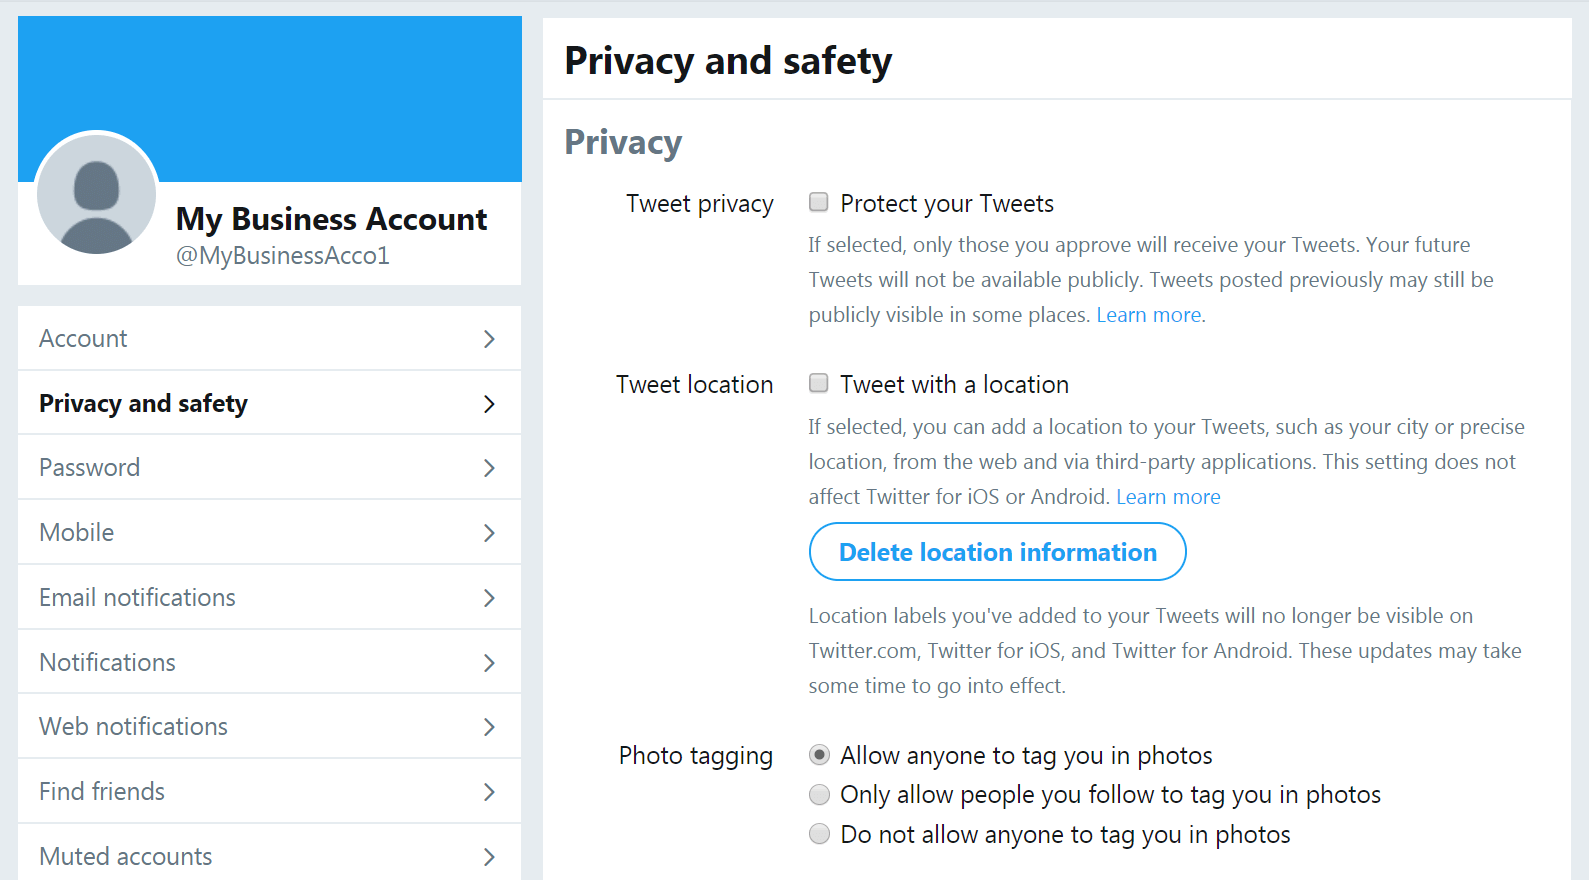 The Twitter settings page.